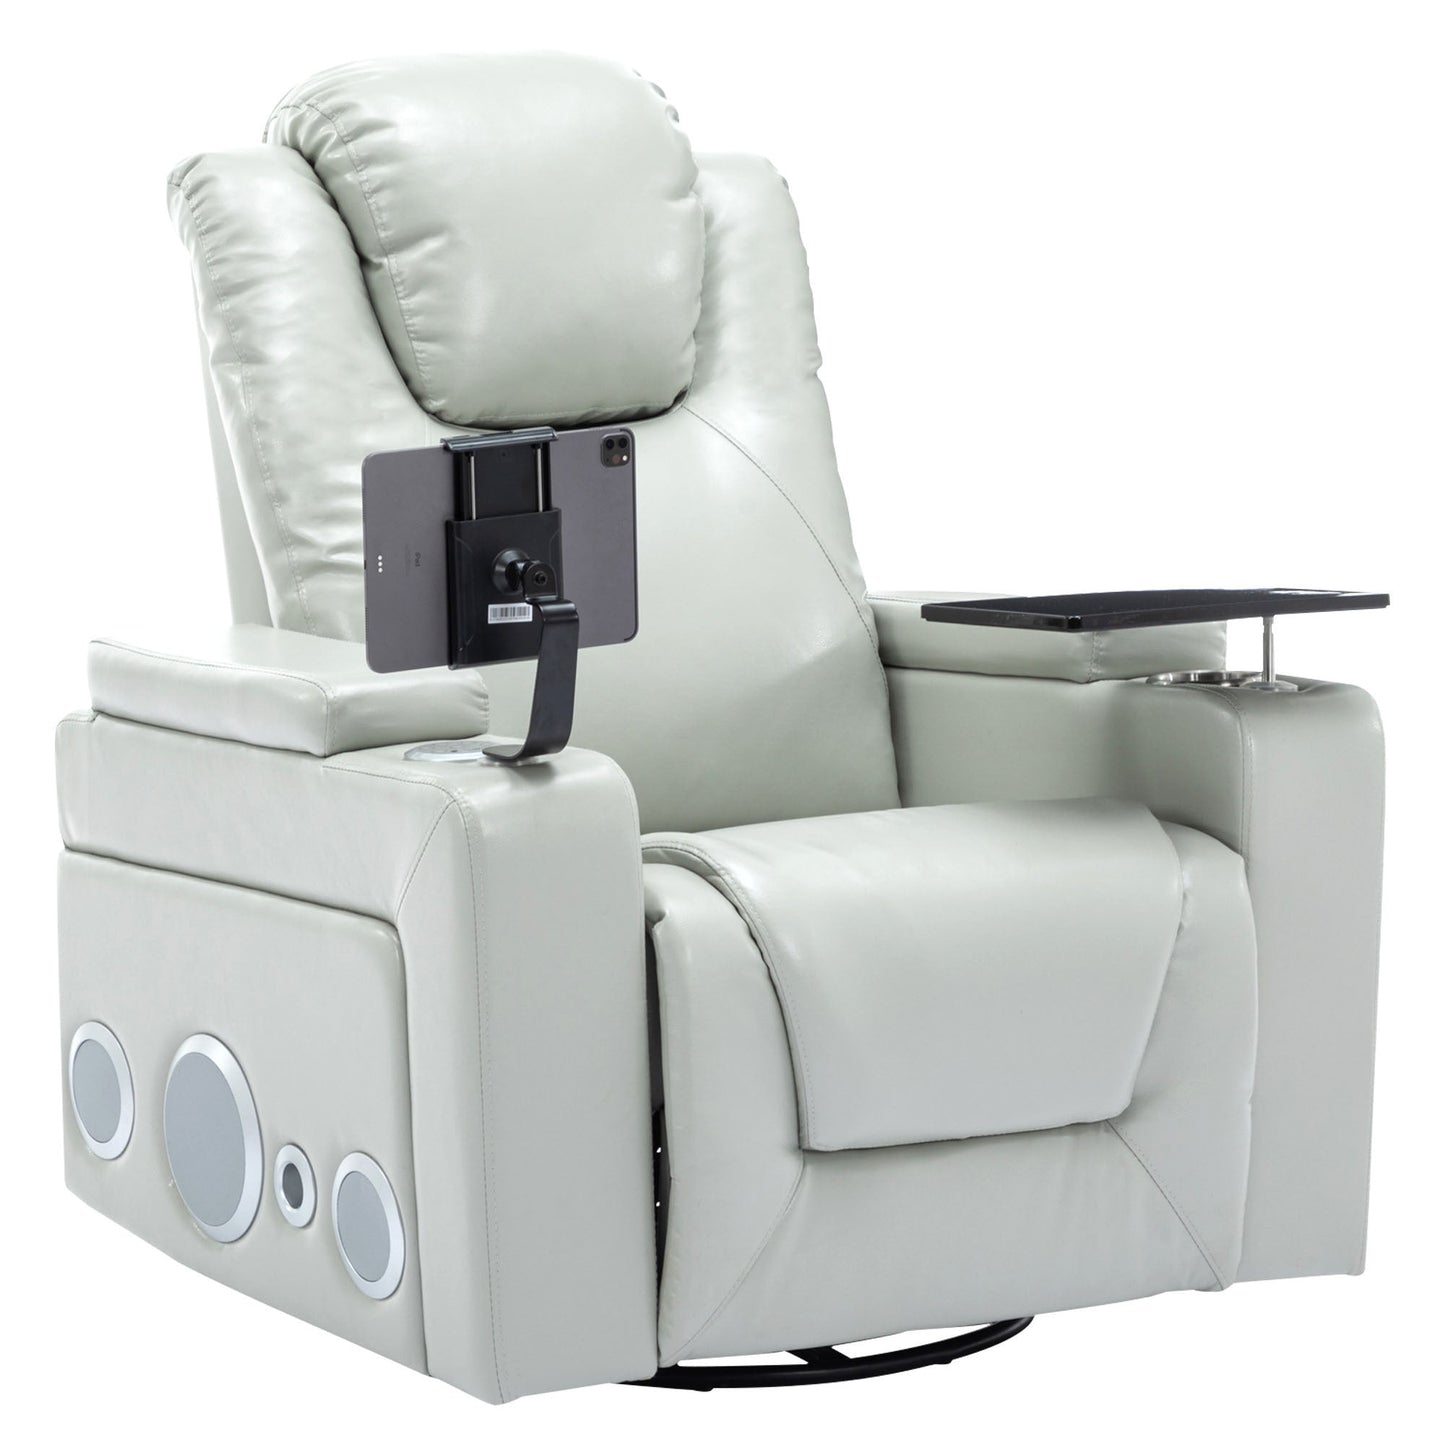 270 Degree Swivel PU Leather Power Recliner Individual Seat Home Theater Recliner with Surround Sound, Cup Holder, Removable Tray Table, Hidden Arm Storage for Living Room, Grey